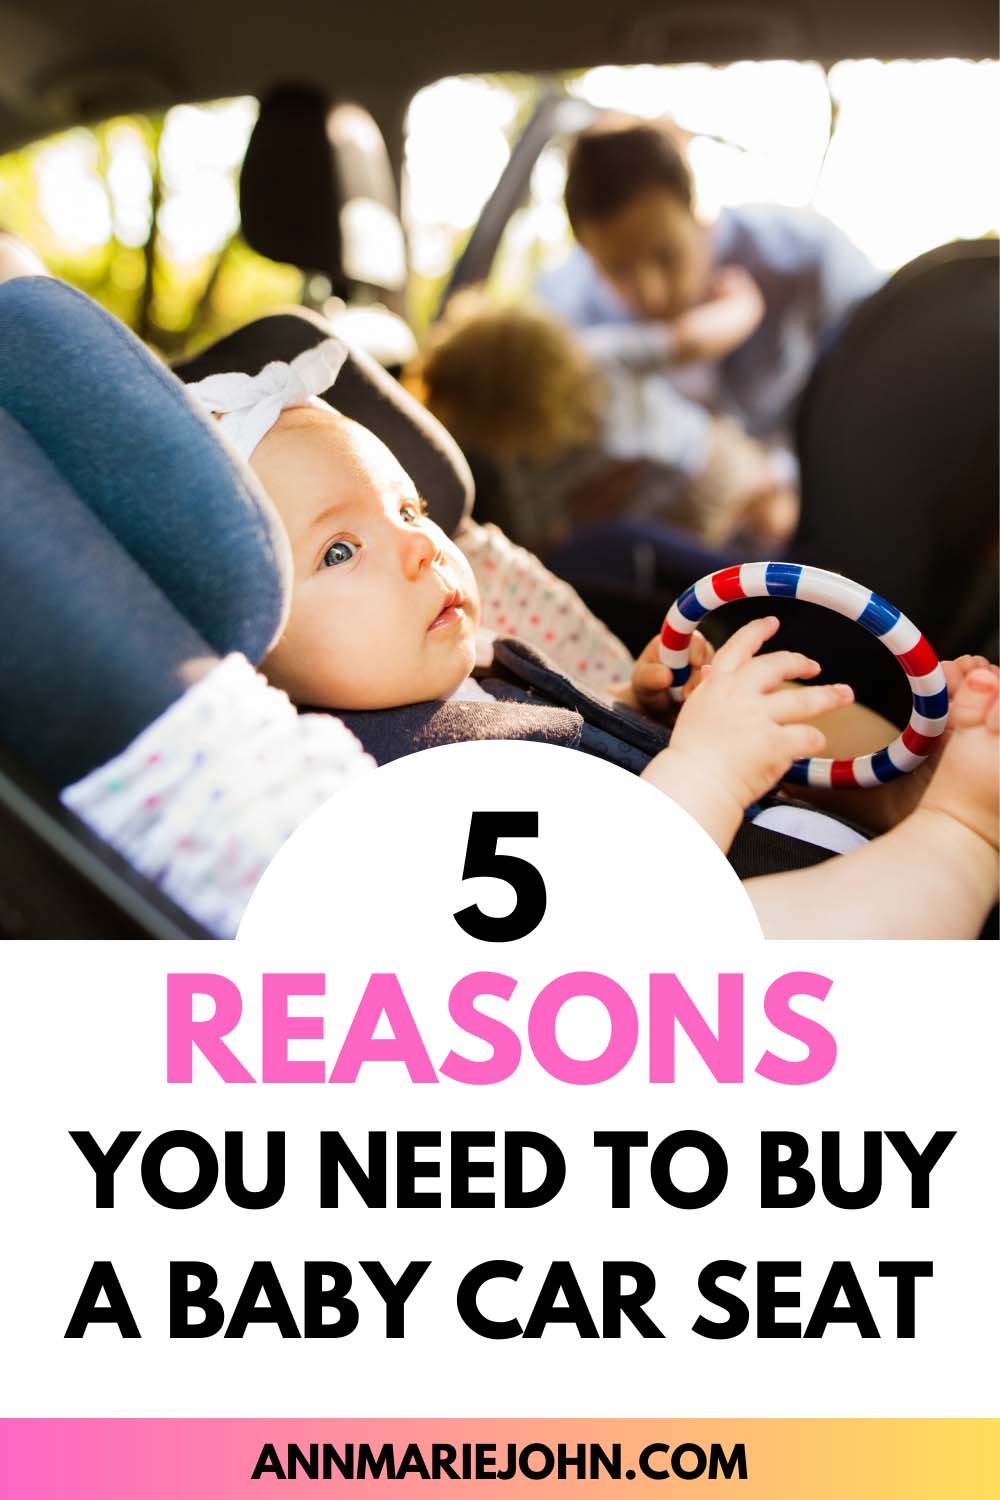 5 Reasons Why You Need to Buy a Baby Car Seat